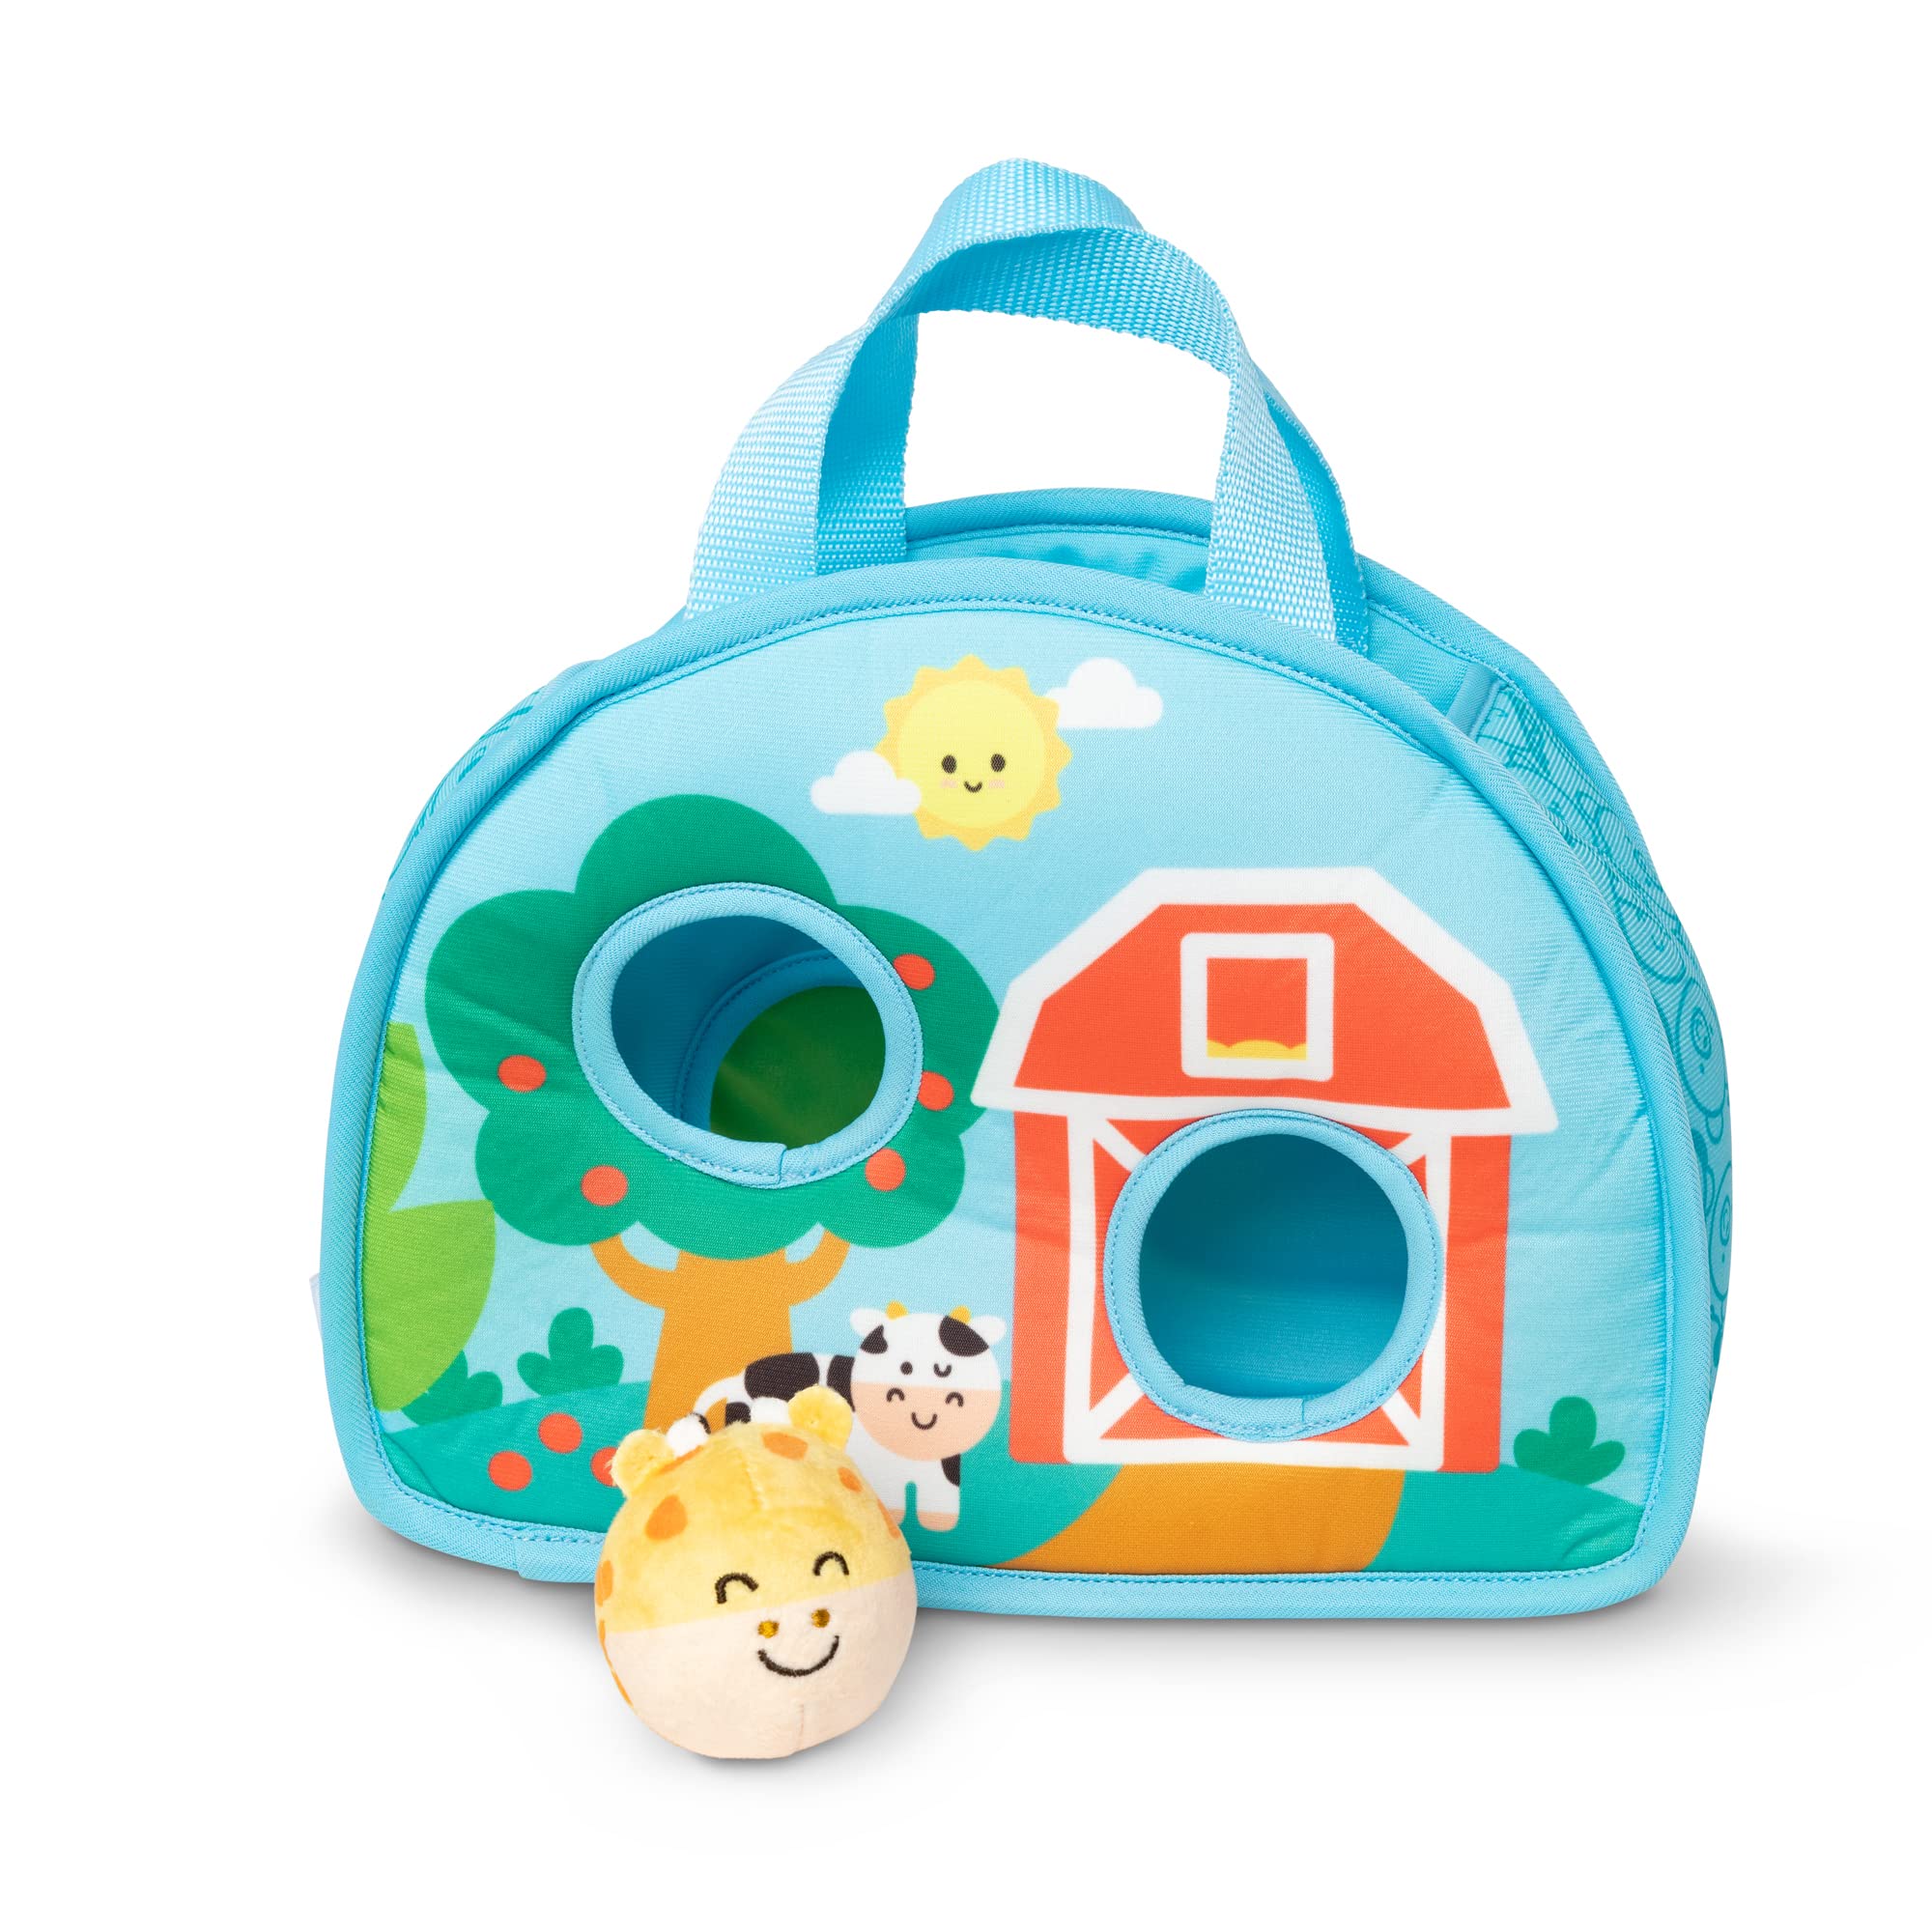 Melissa & Doug Rollables Take-Along Tote Play Set w/ Giraffe $7.15 + Free Shipping w/ Prime or on $35+